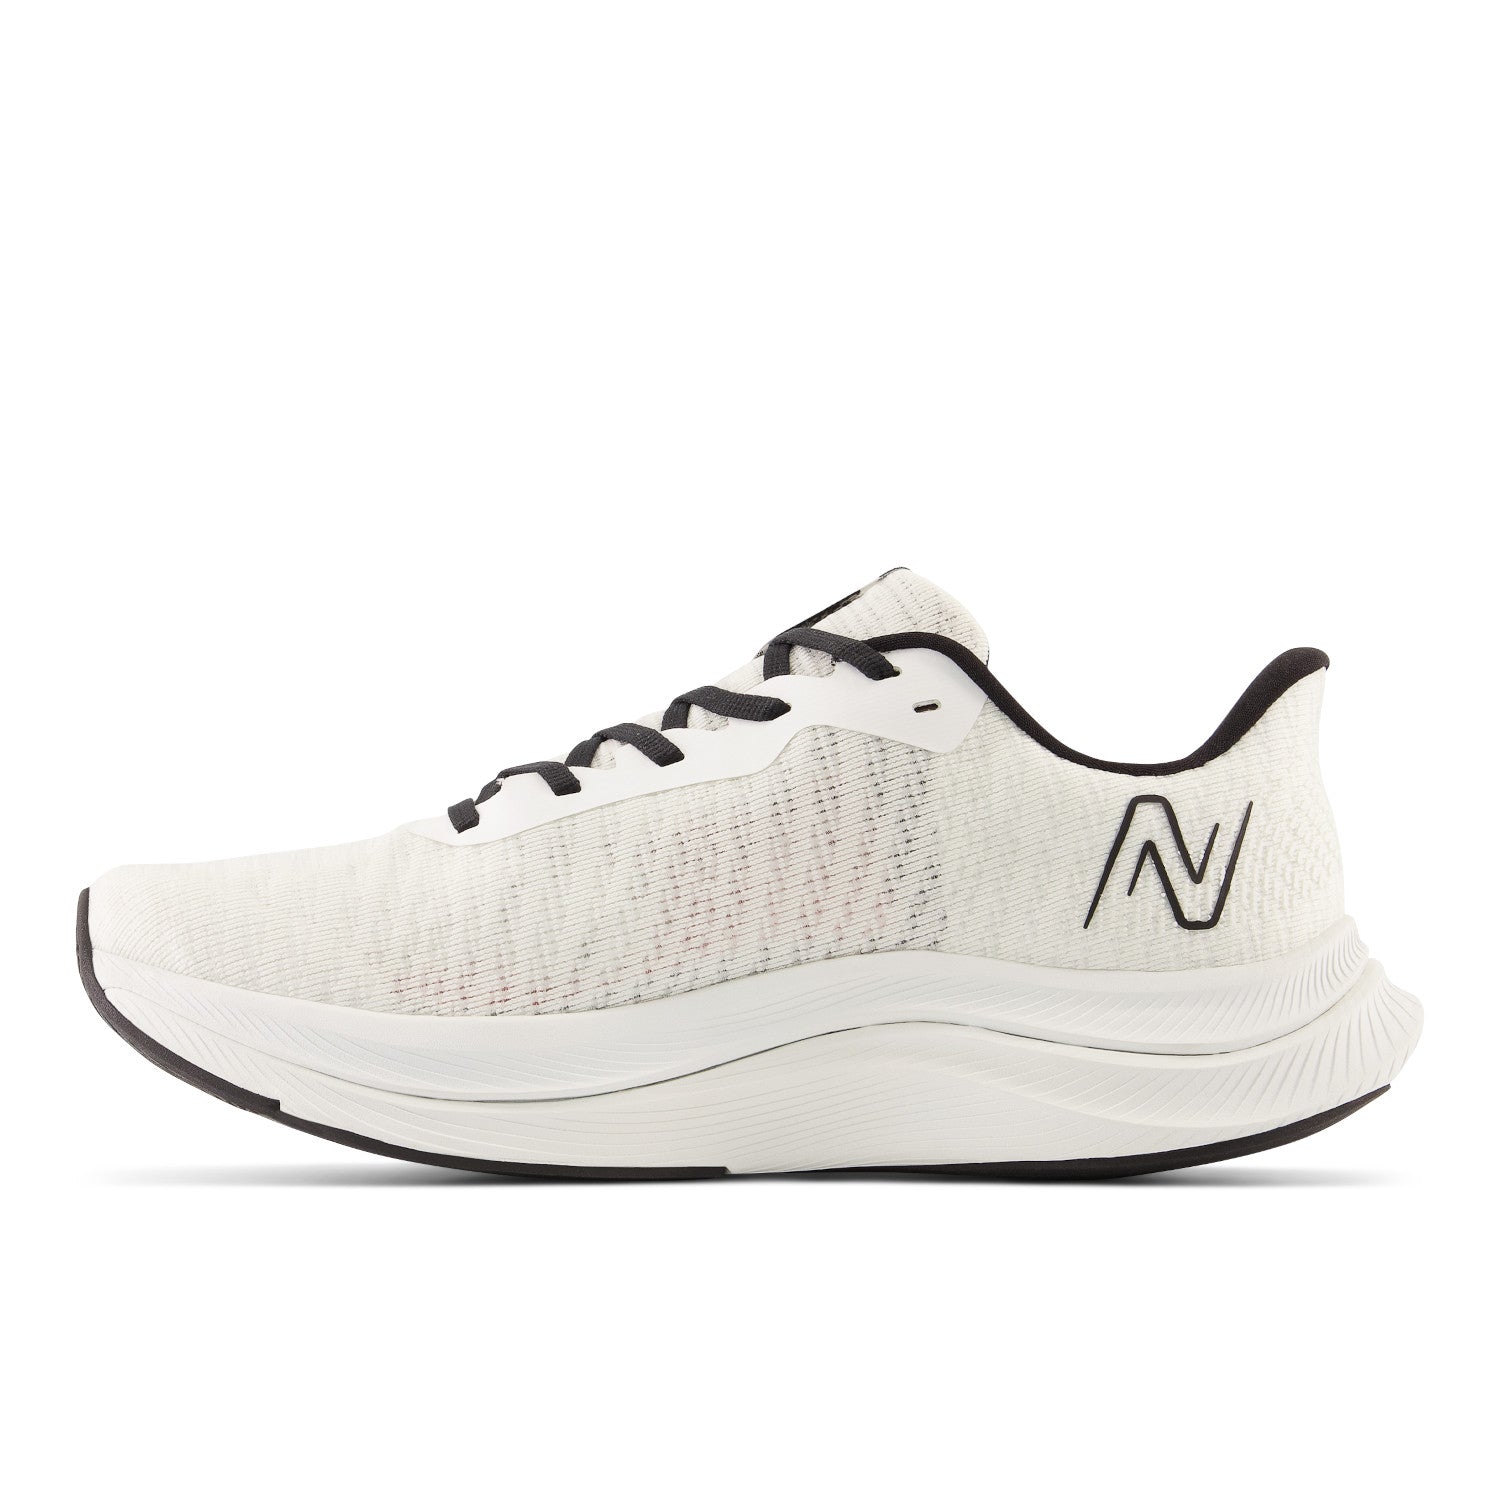 New Balance FuelCell Propel v4 MFCPRLW4 Men's7